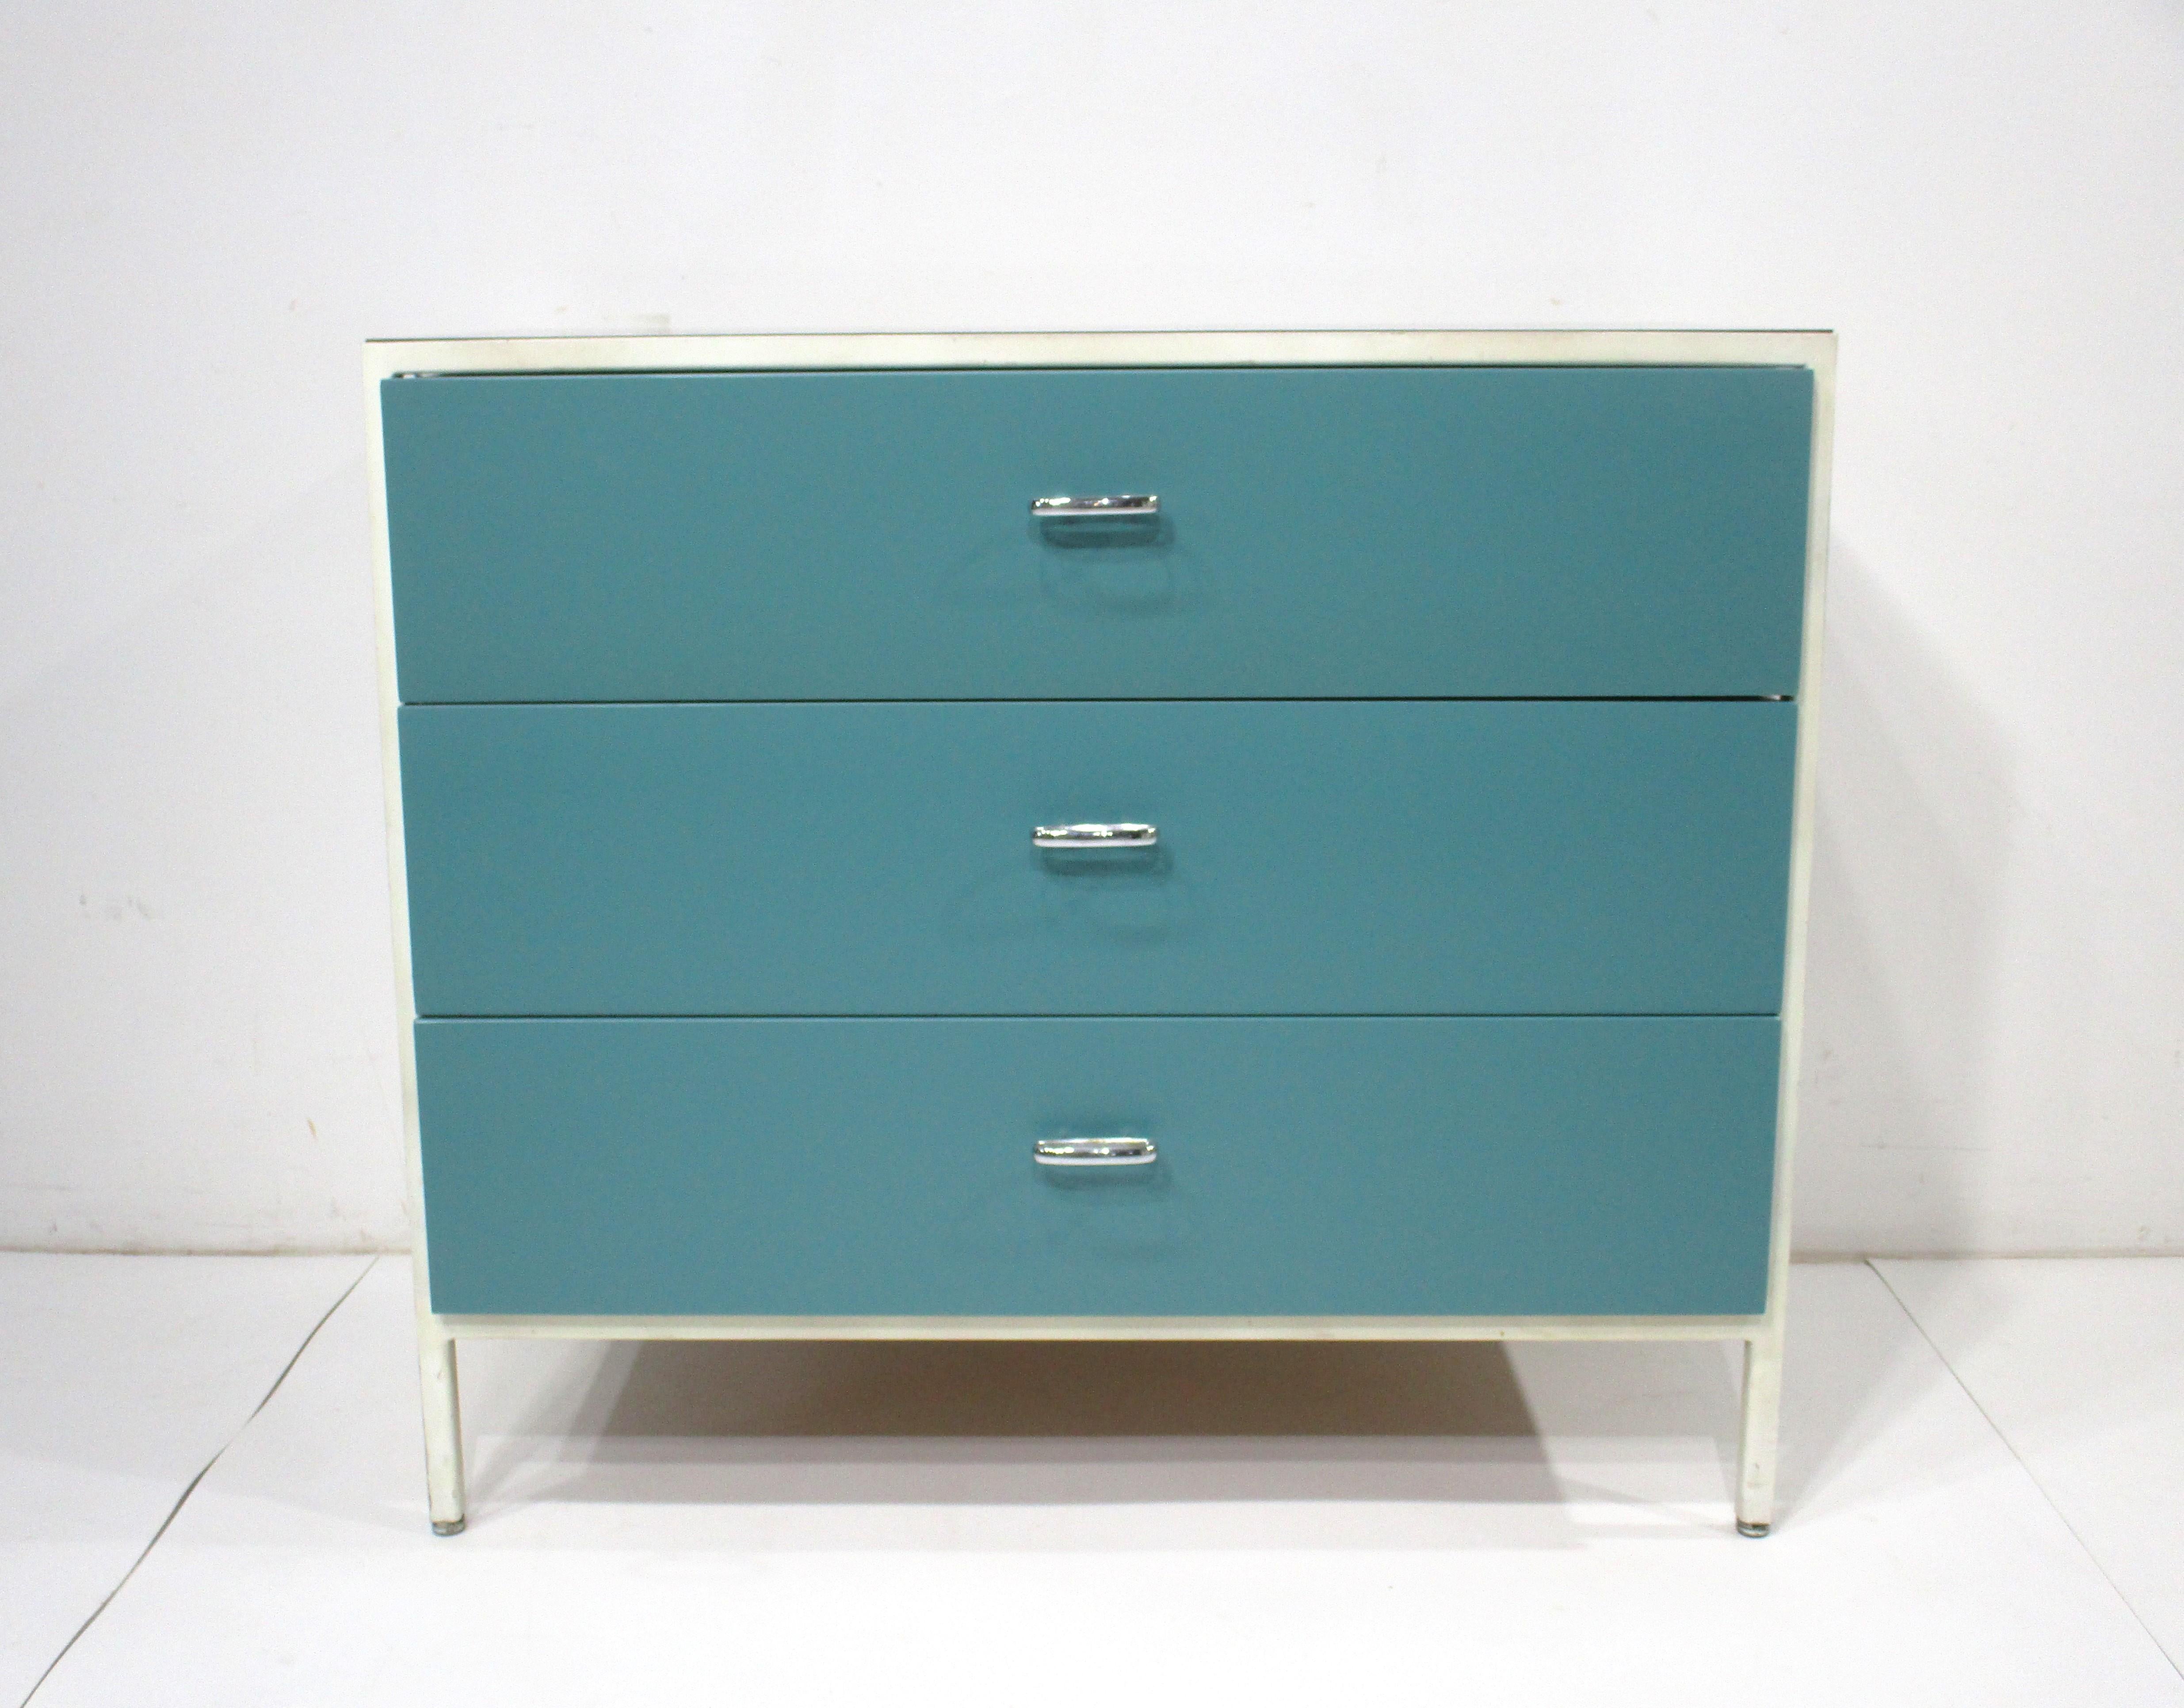 A steel framed dresser chest with off white frame ,  blue fronted wooden drawers having the sides and back painted in contrasting olive green . The oval chrome metal pulls and satin black Laminate top accent the design sensibility of this classic